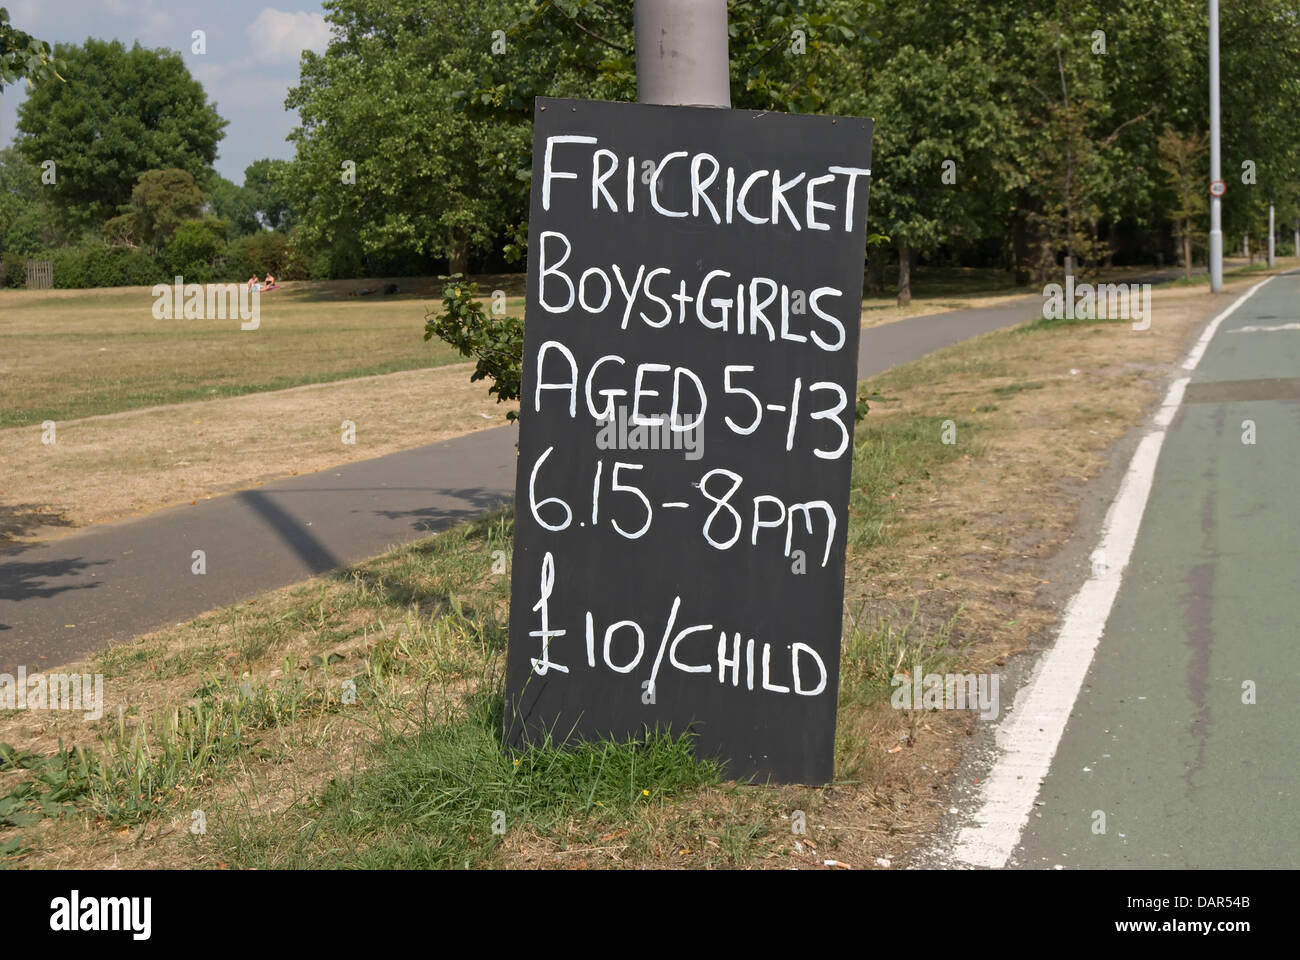 handmade road side sign advertising friday cricket for young boys and girls, richmond, surrey, england Stock Photo